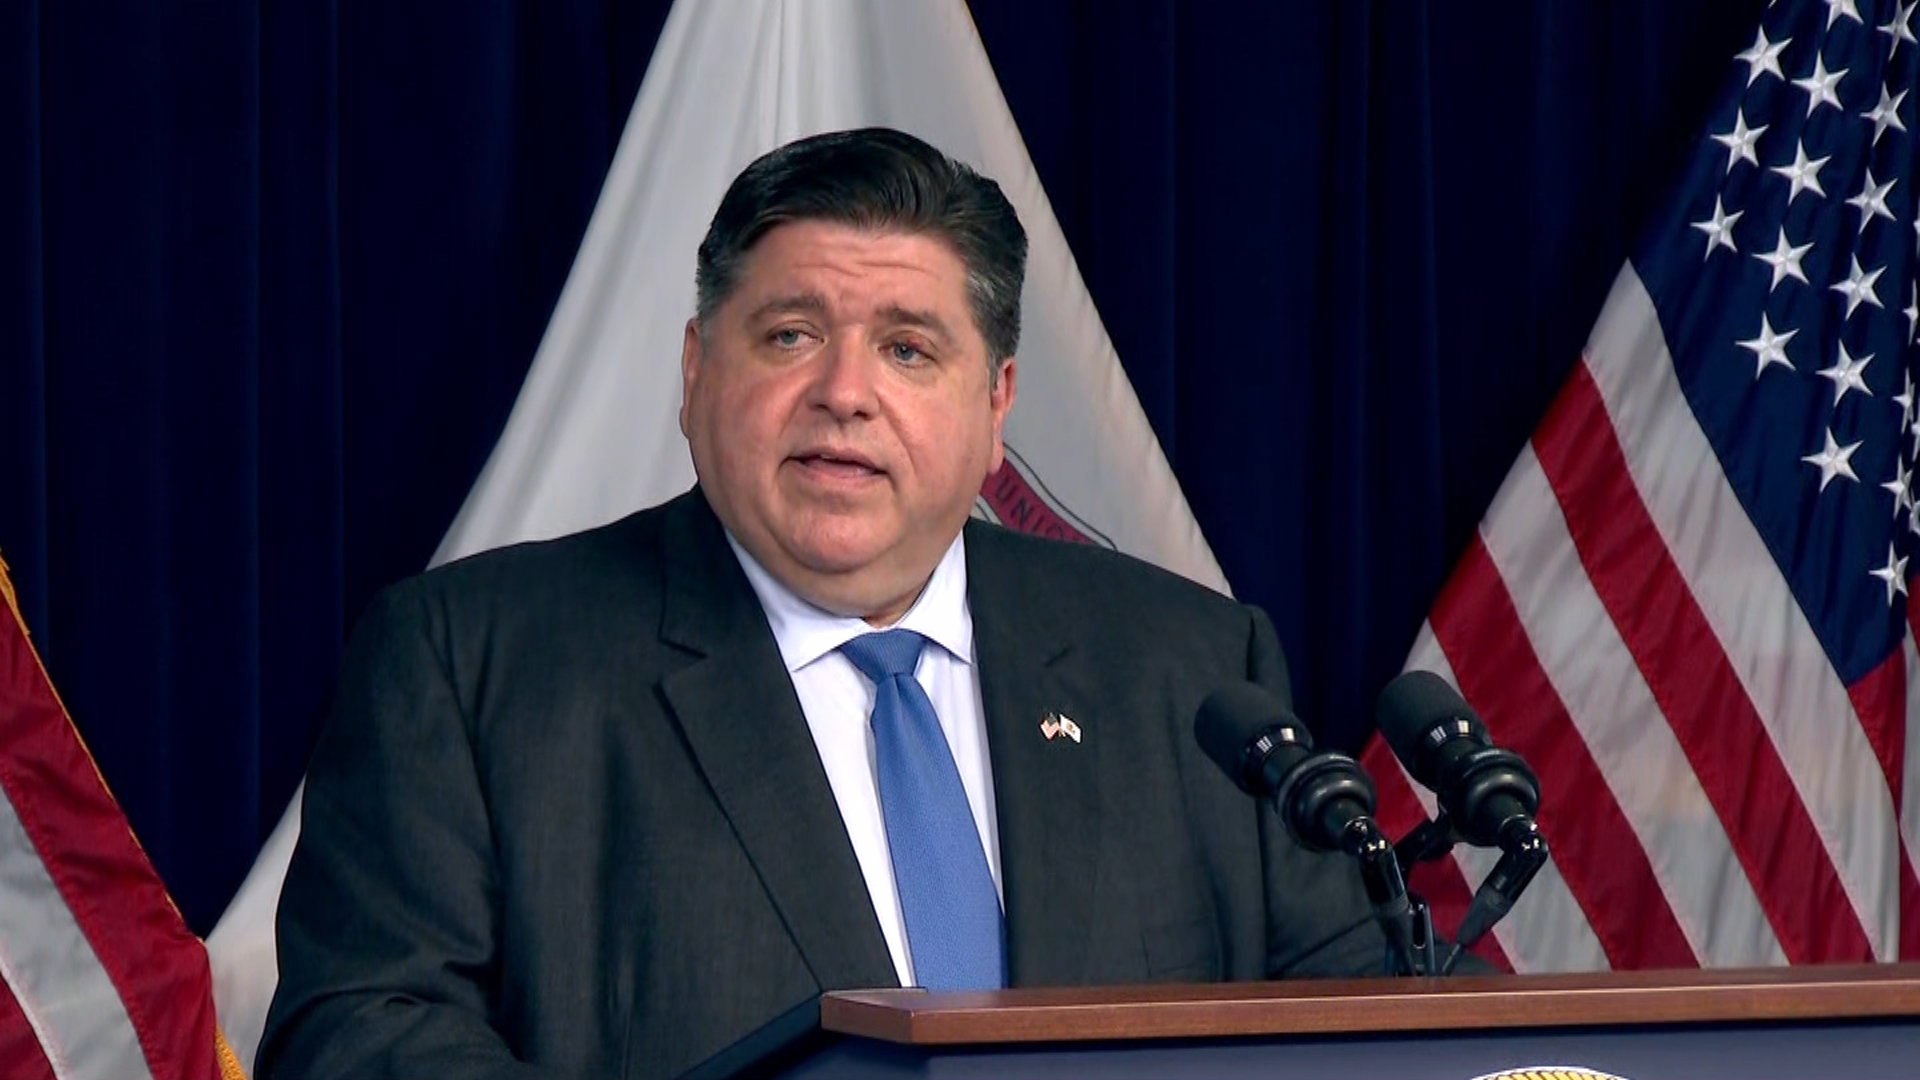 Tax Records: Pritzker, Wife Report $5.1M Income for 2020